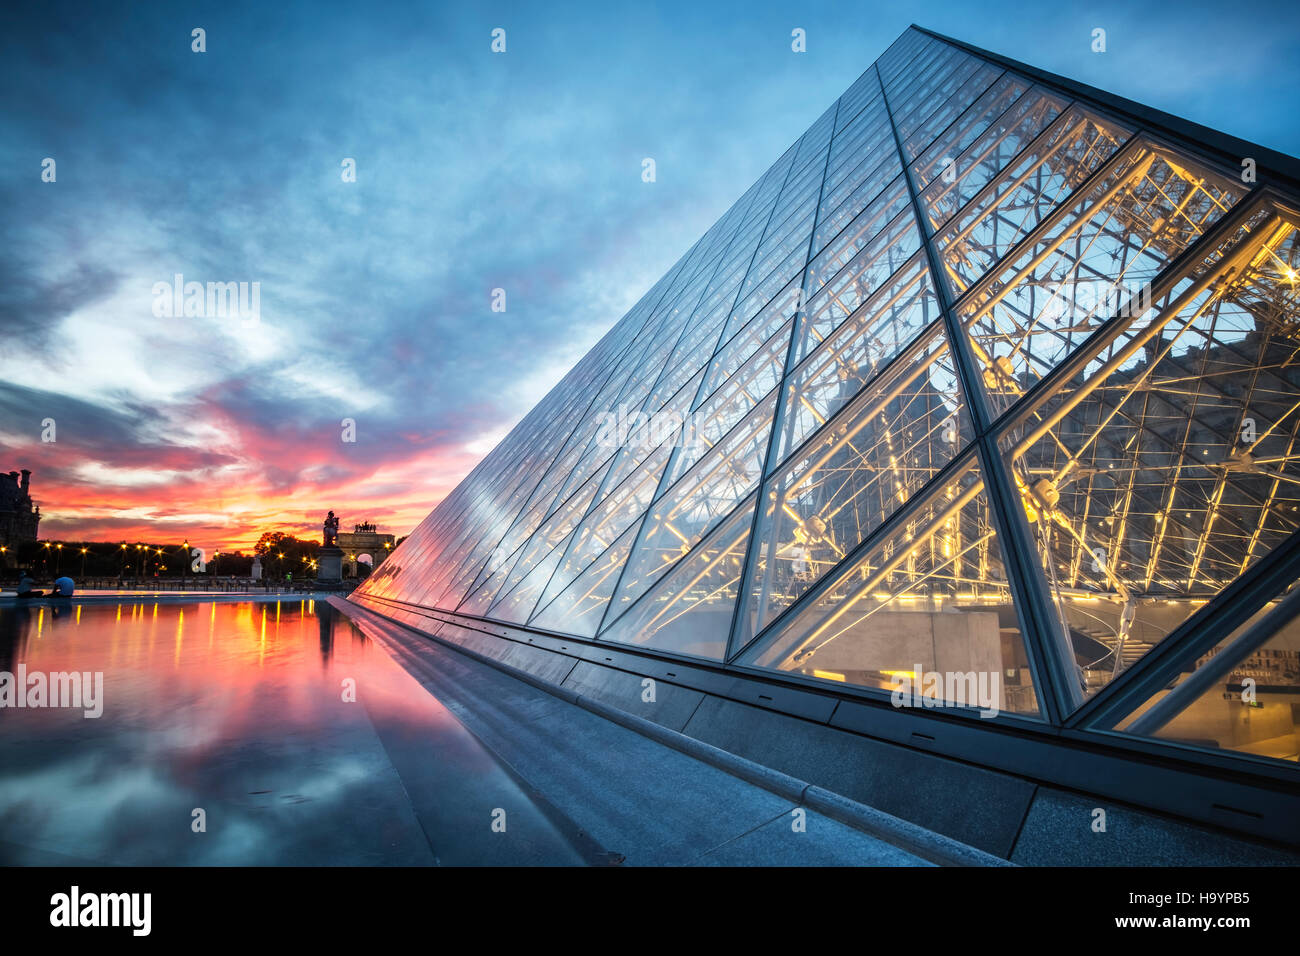 Sunset over the glass pyramid at the Louvre, Paris Stock Photo